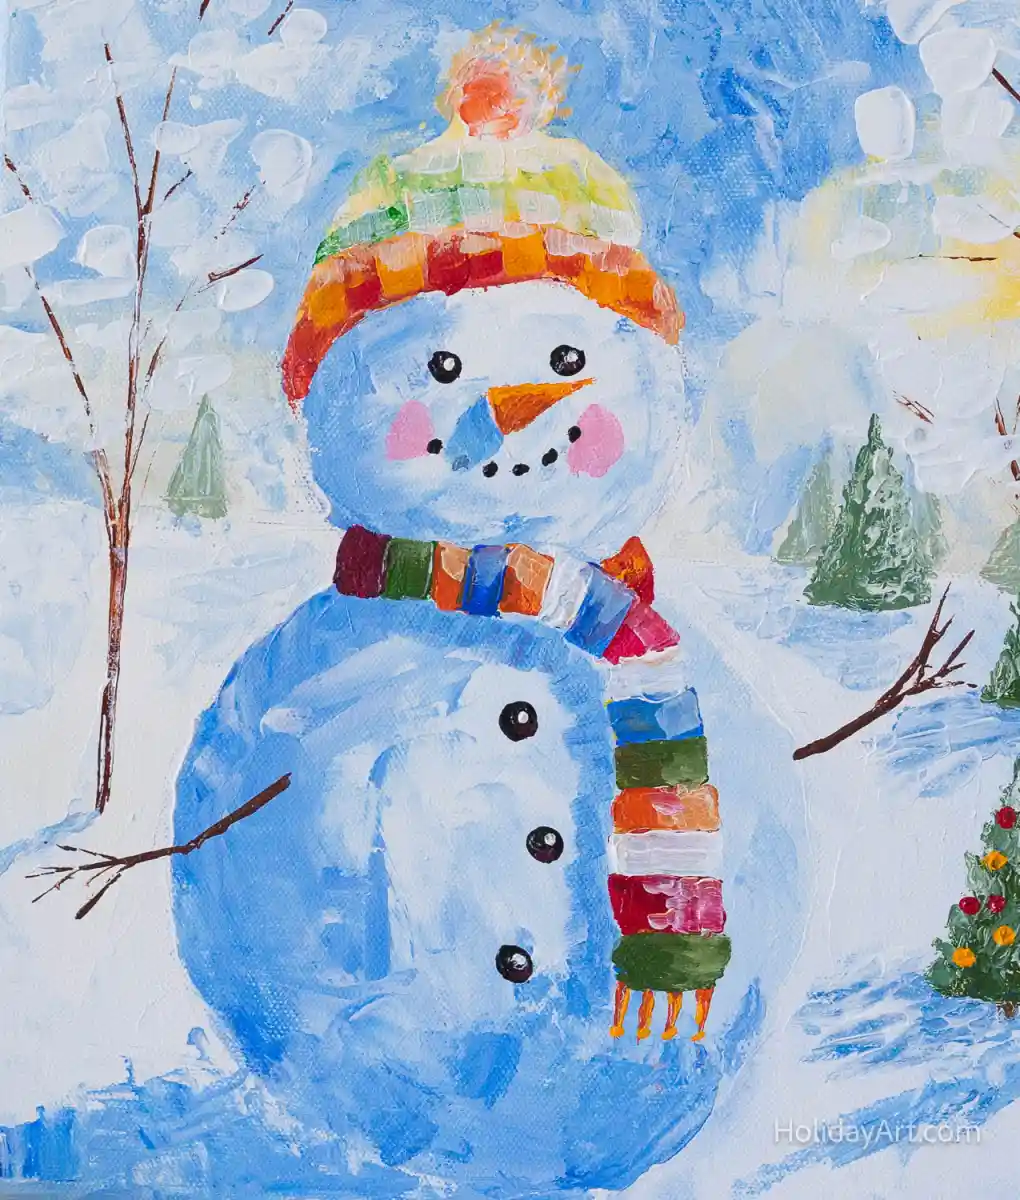 Original painting of a Christmas Snow Man in the Pocono Mountains.